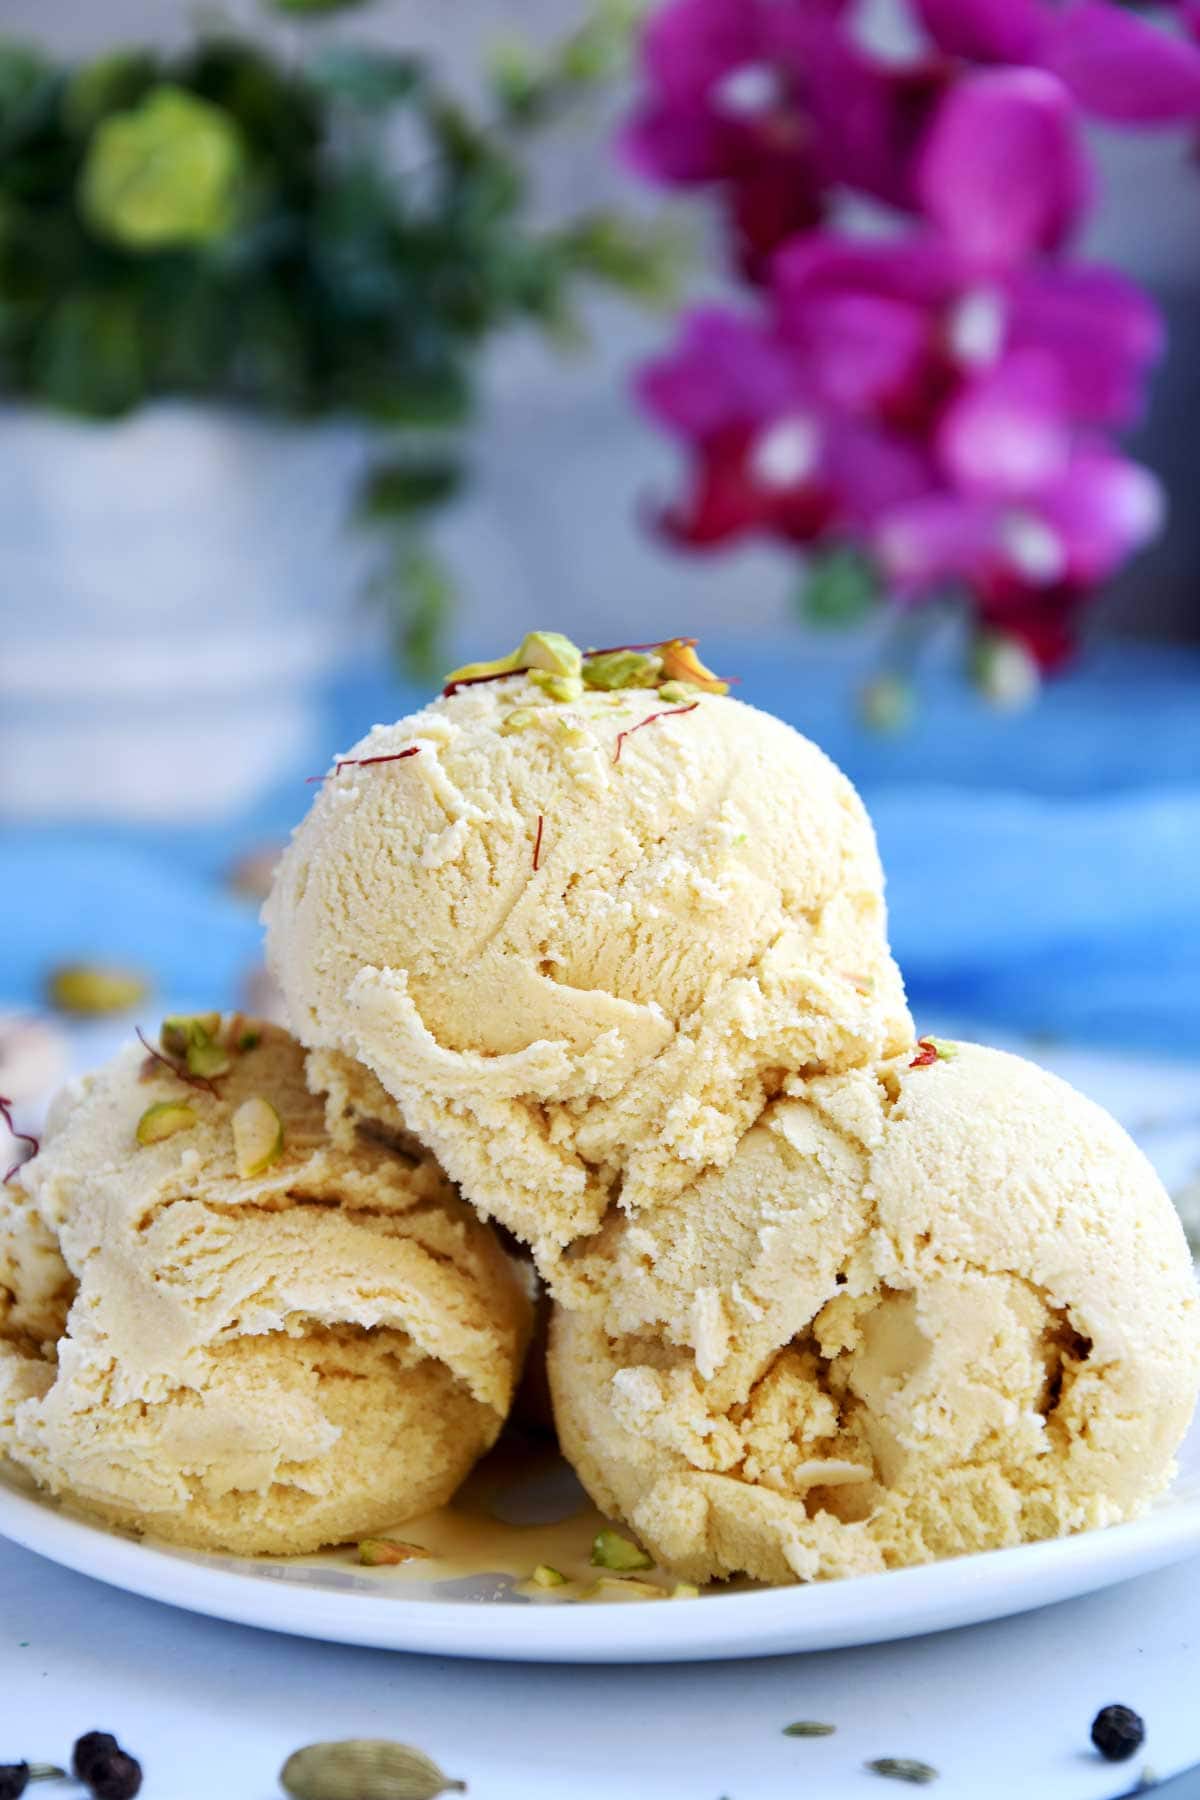 Thandai ice cream scoops in a plate.